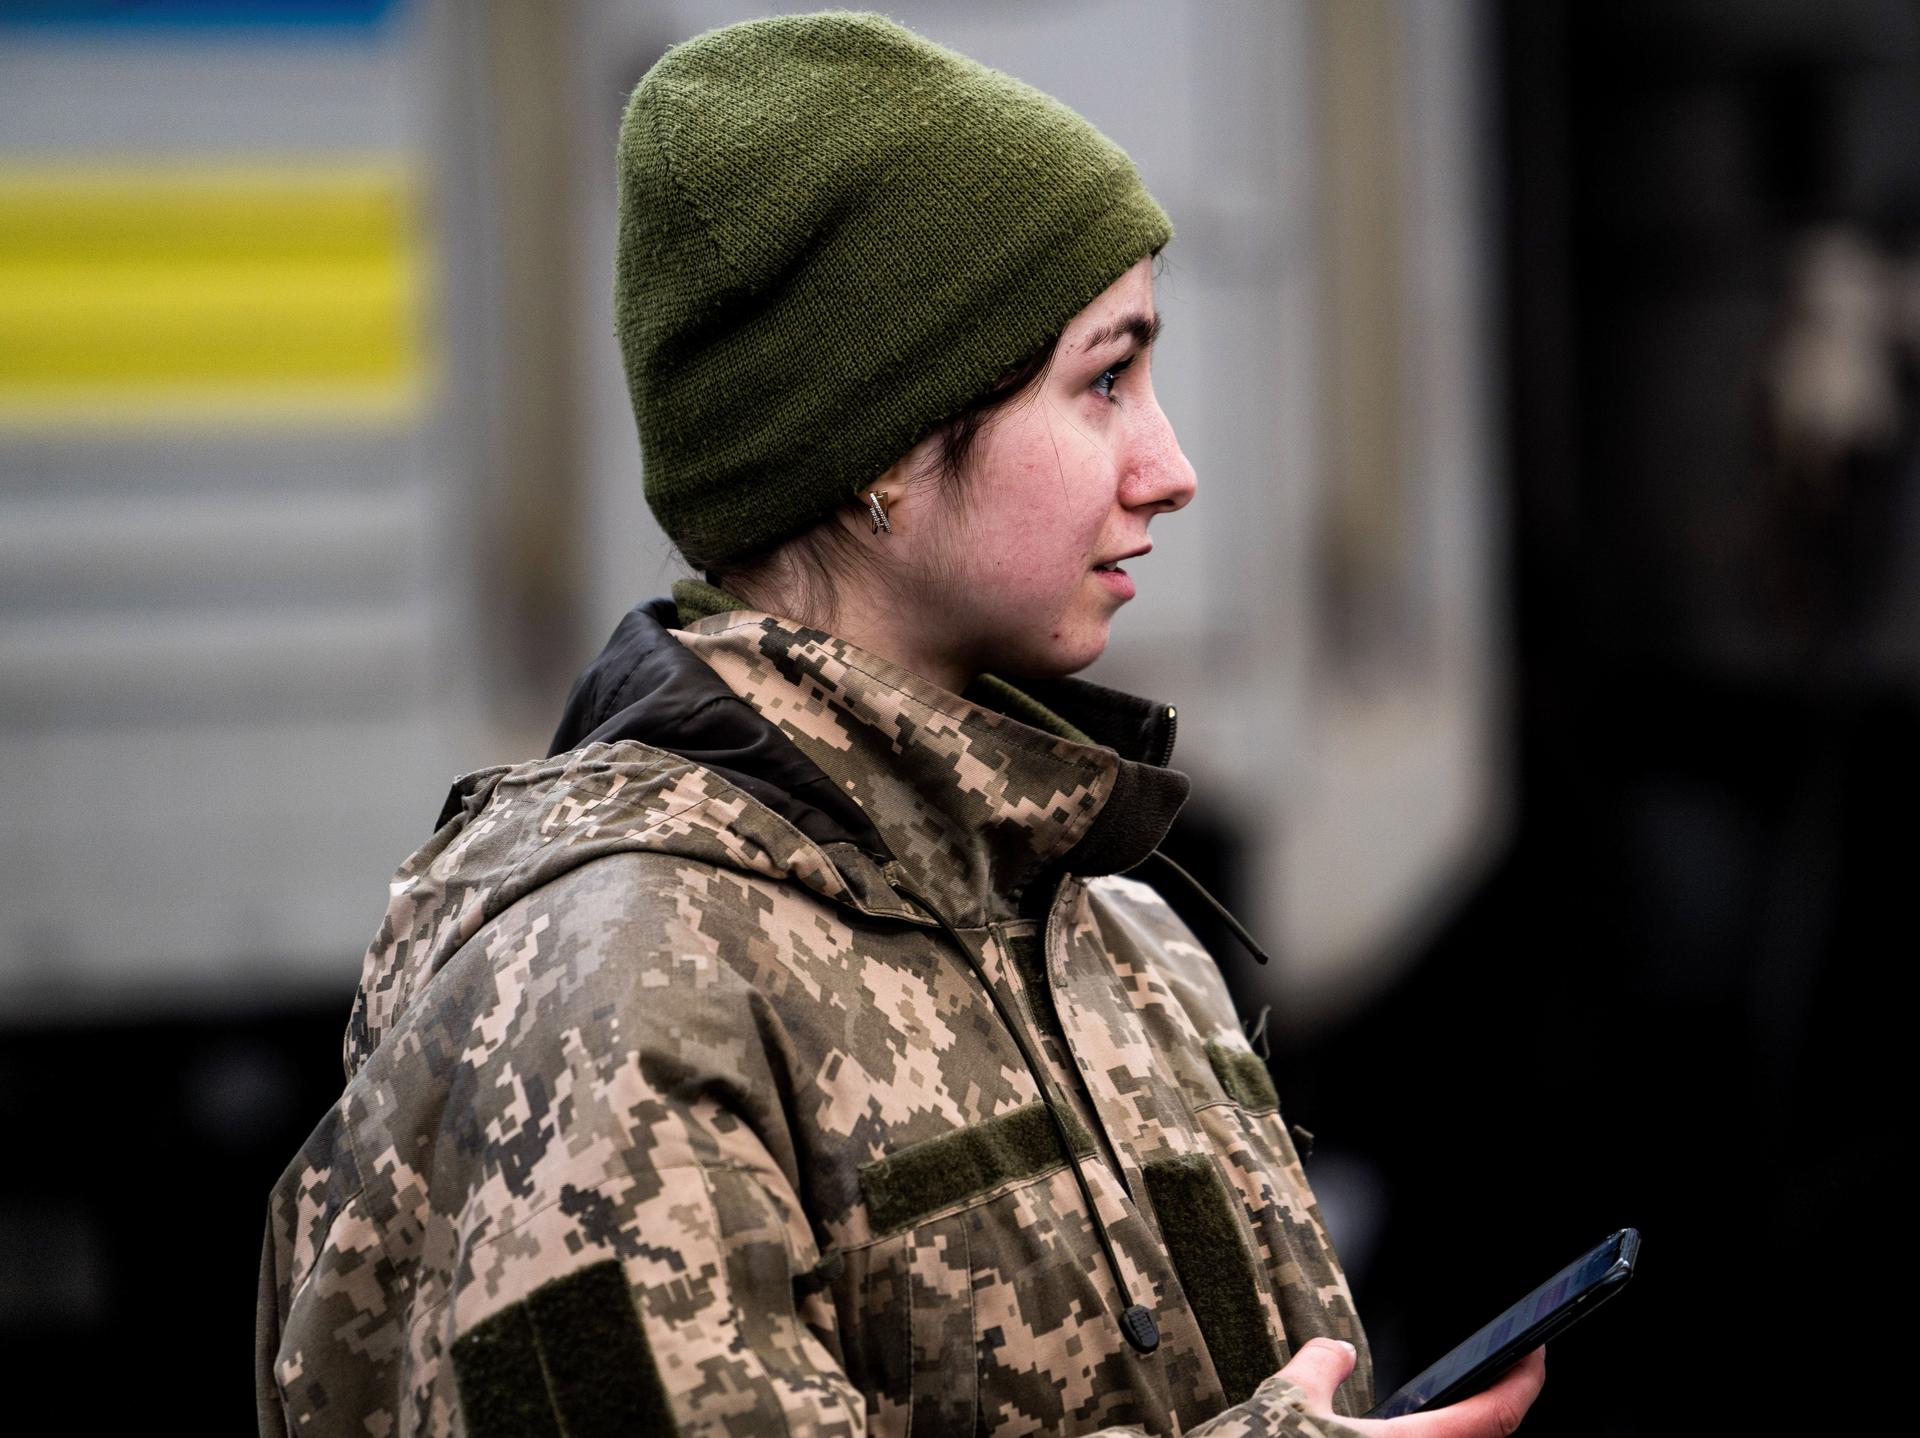 A woman Ukrainian soldier in combat fatigues at a train station